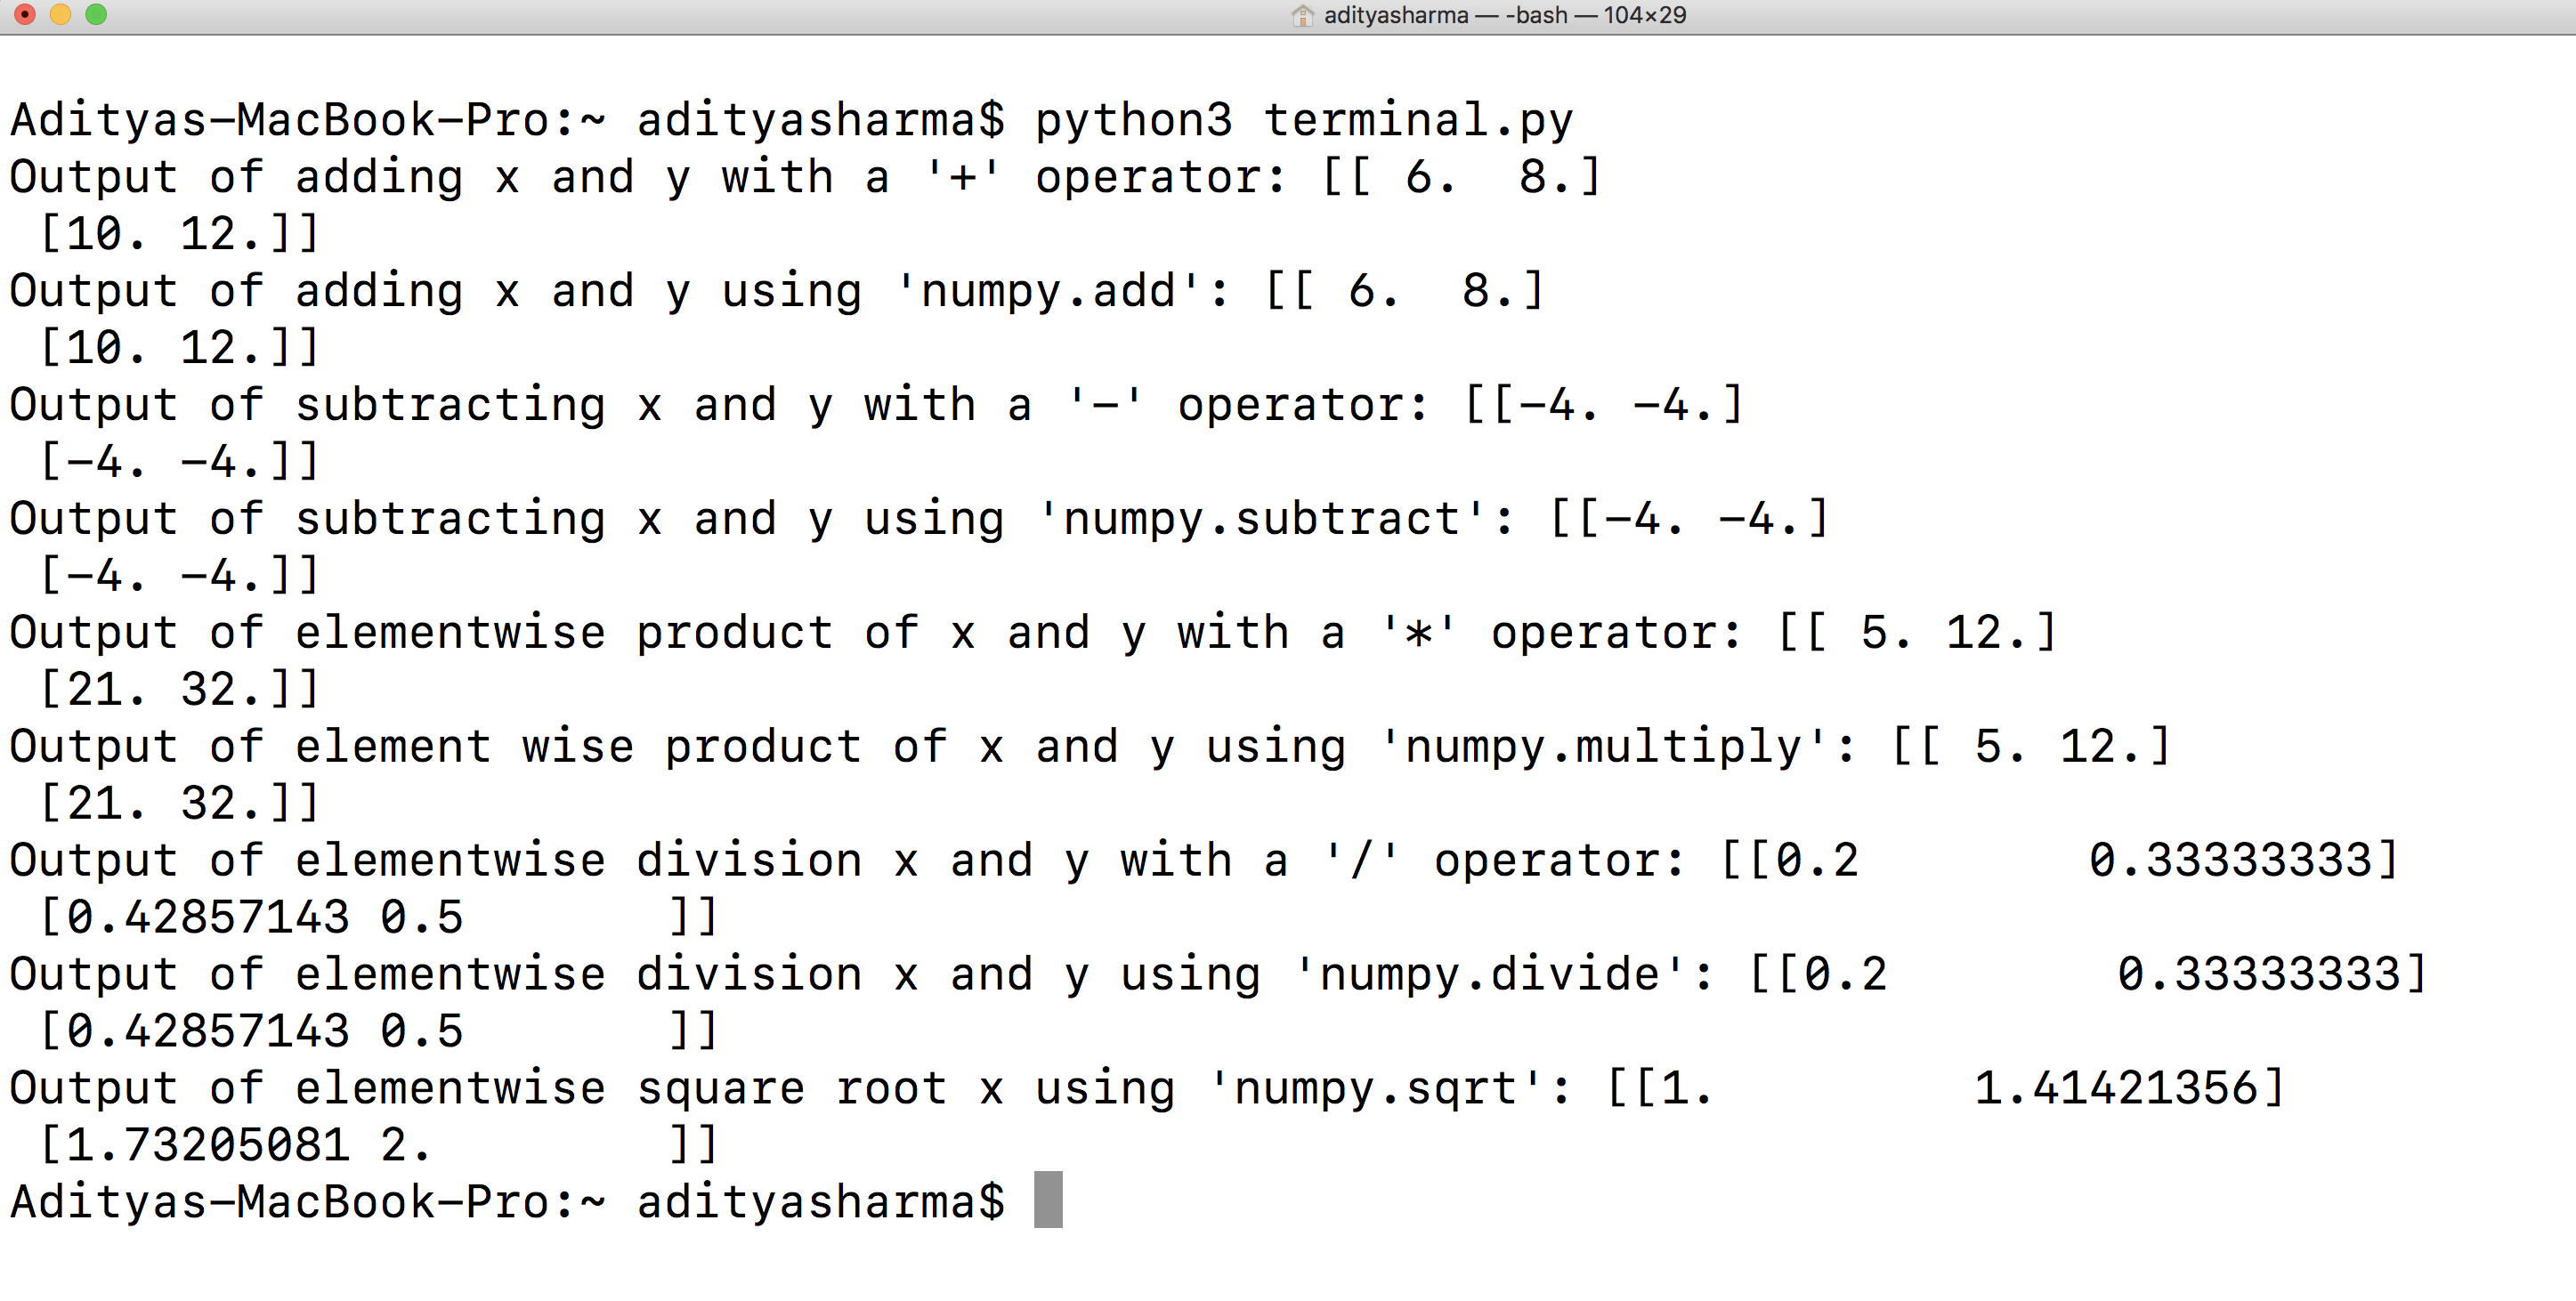 Running the .py script from the Terminal